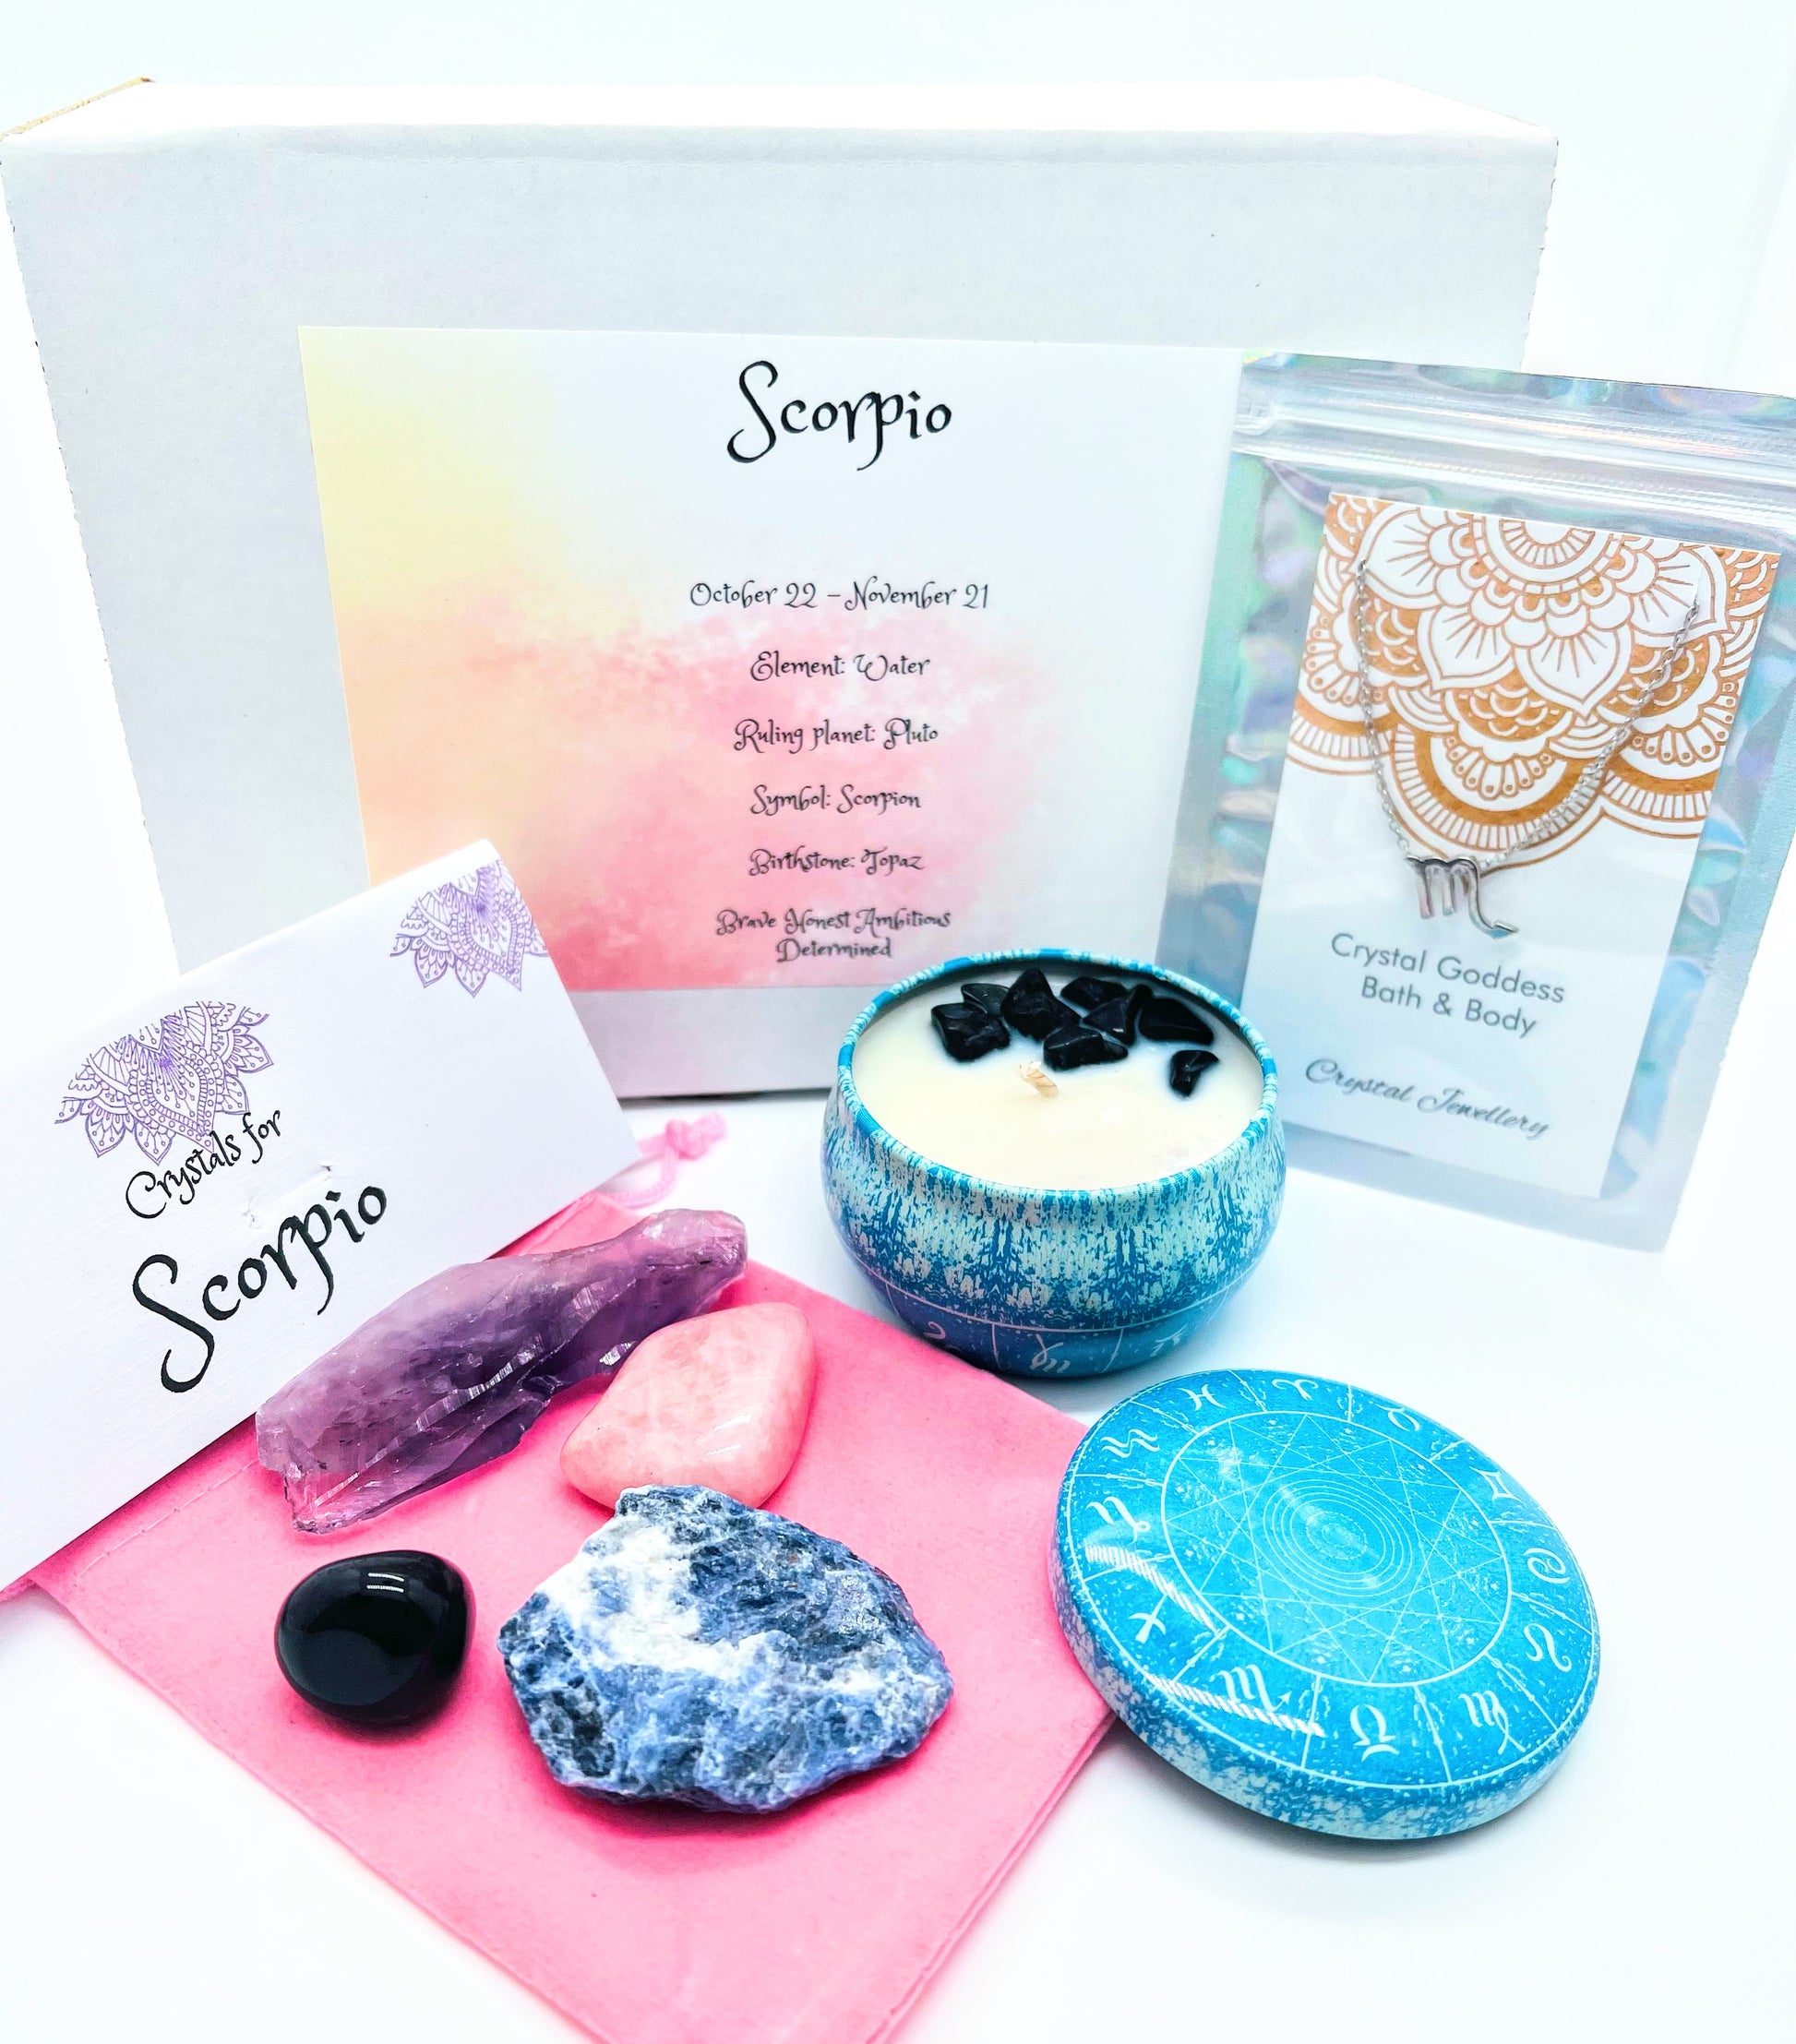 Scorpio Zodiac gift box showing crystals for this sign and pendant necklace and crystal set.